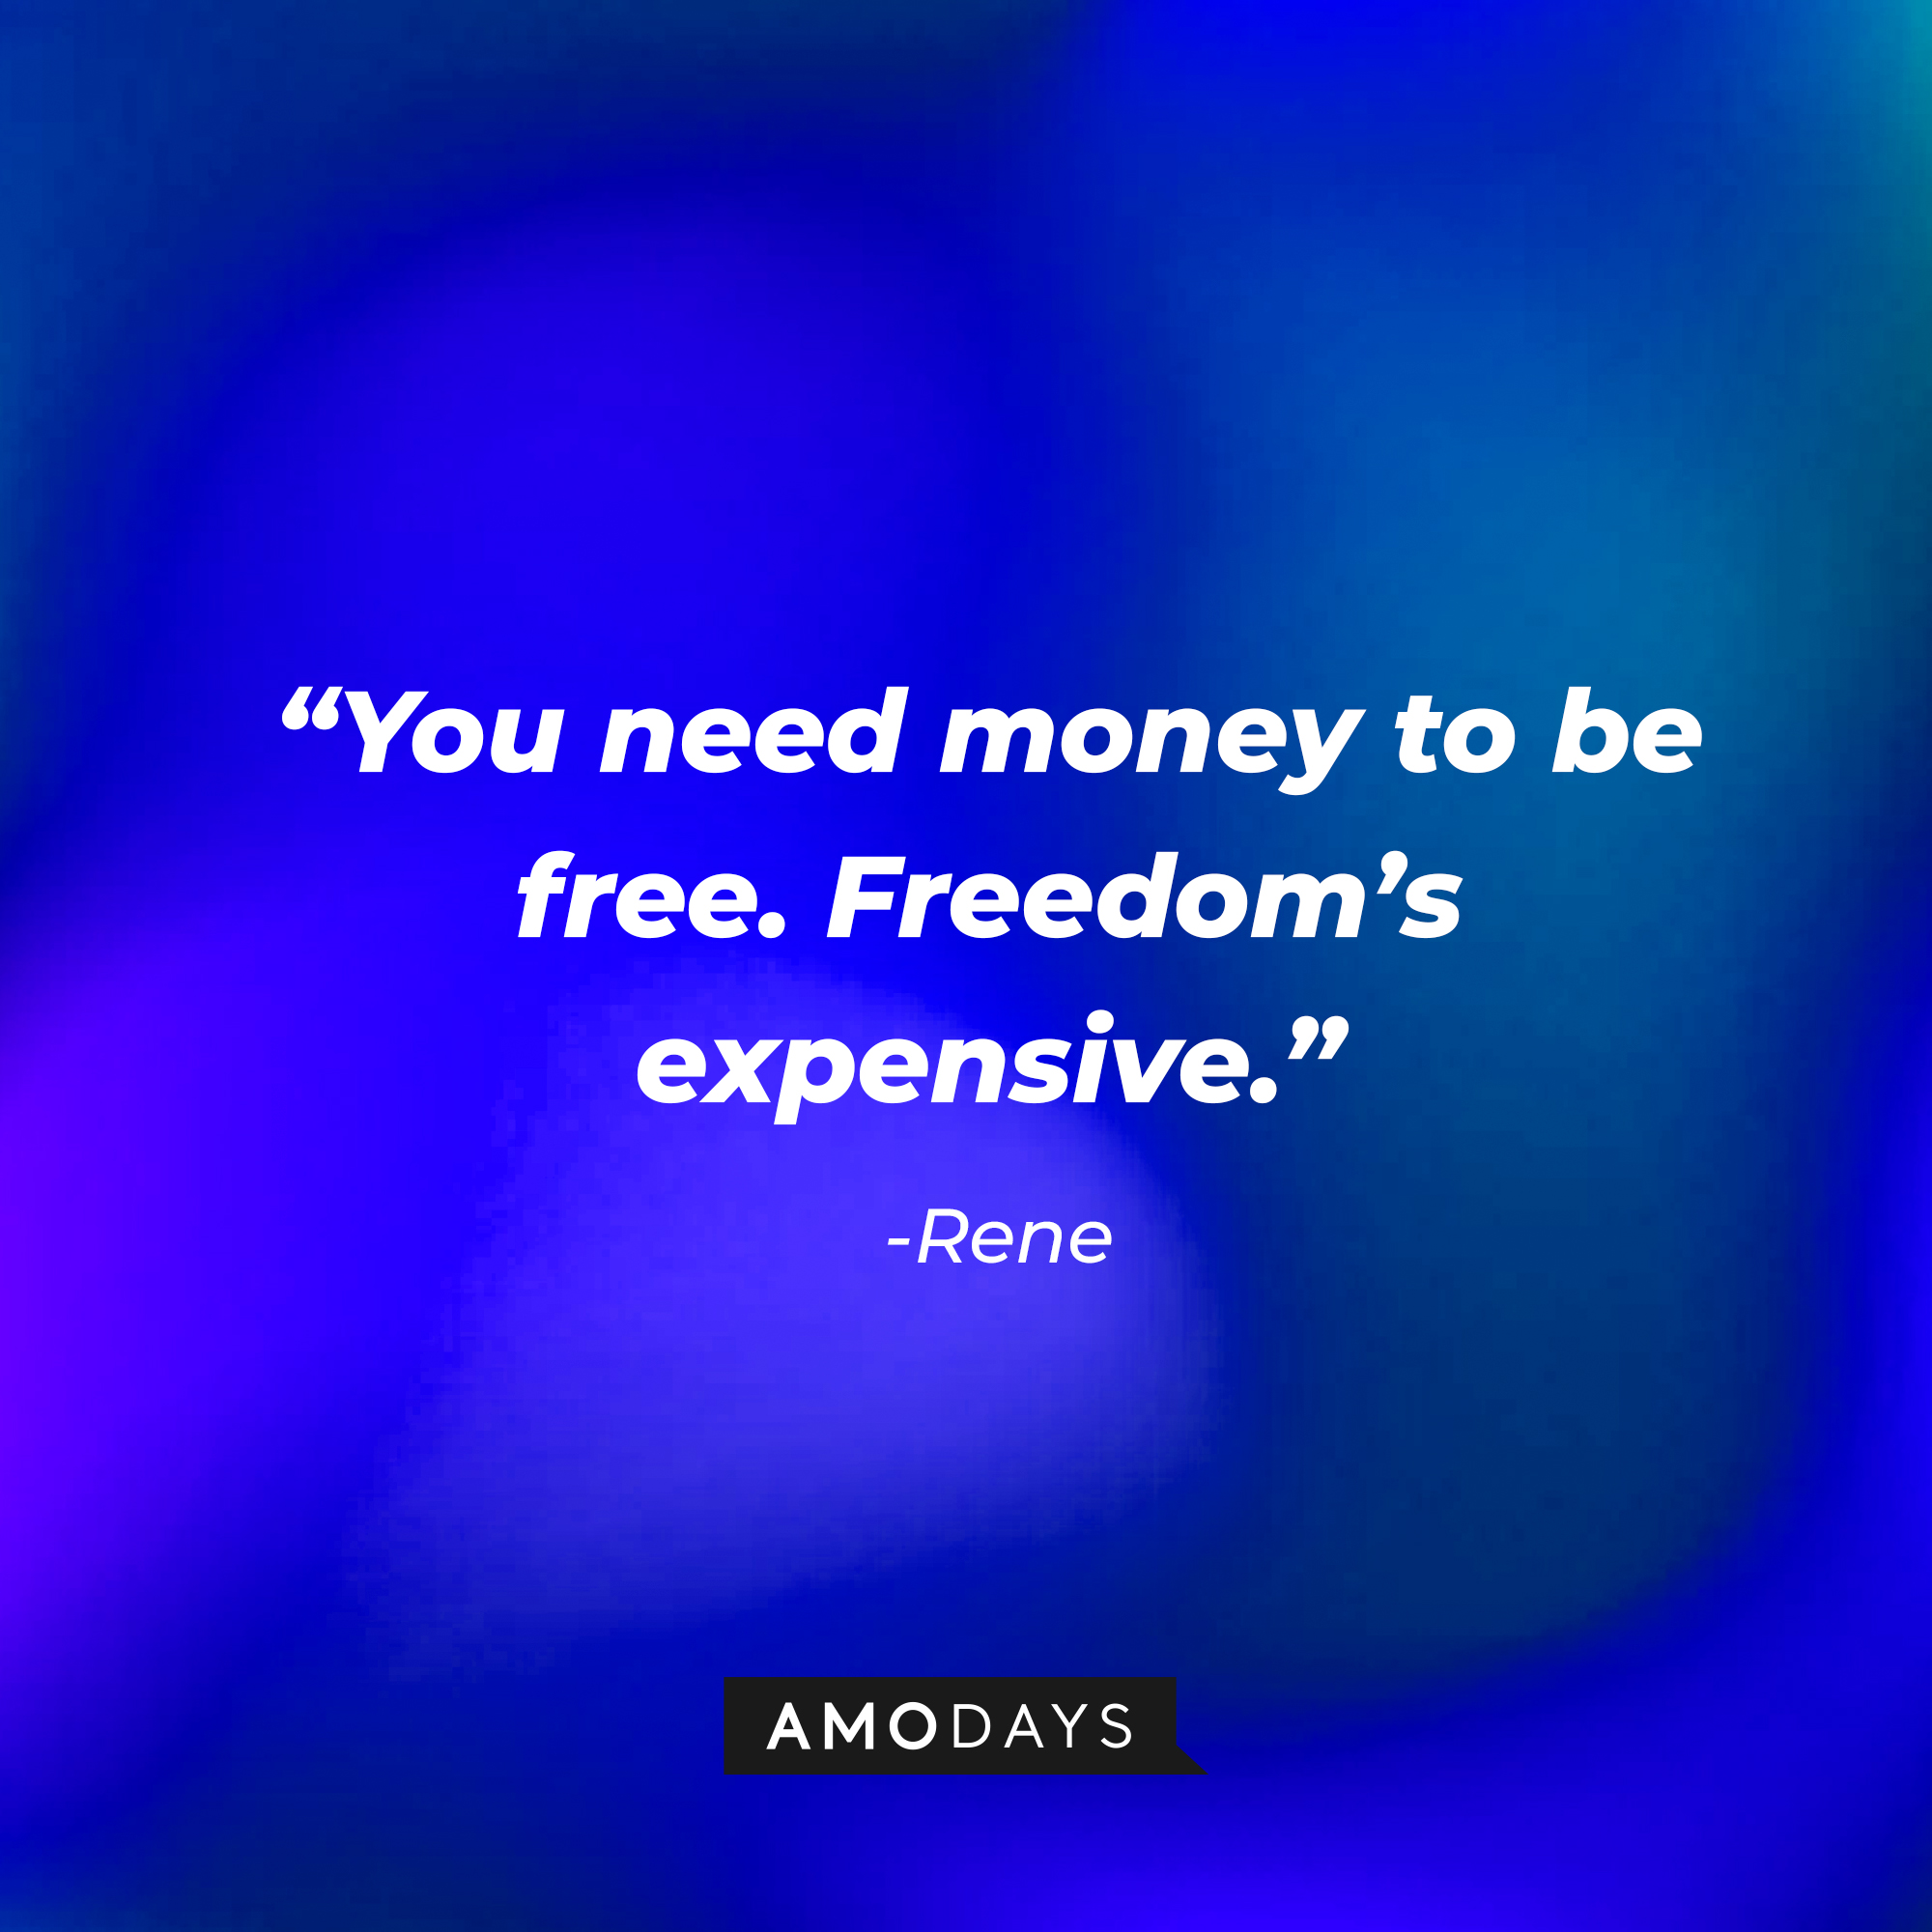 Renes quote: “You need money to be free. Freedom’s expensive.” | Source: AmoDays